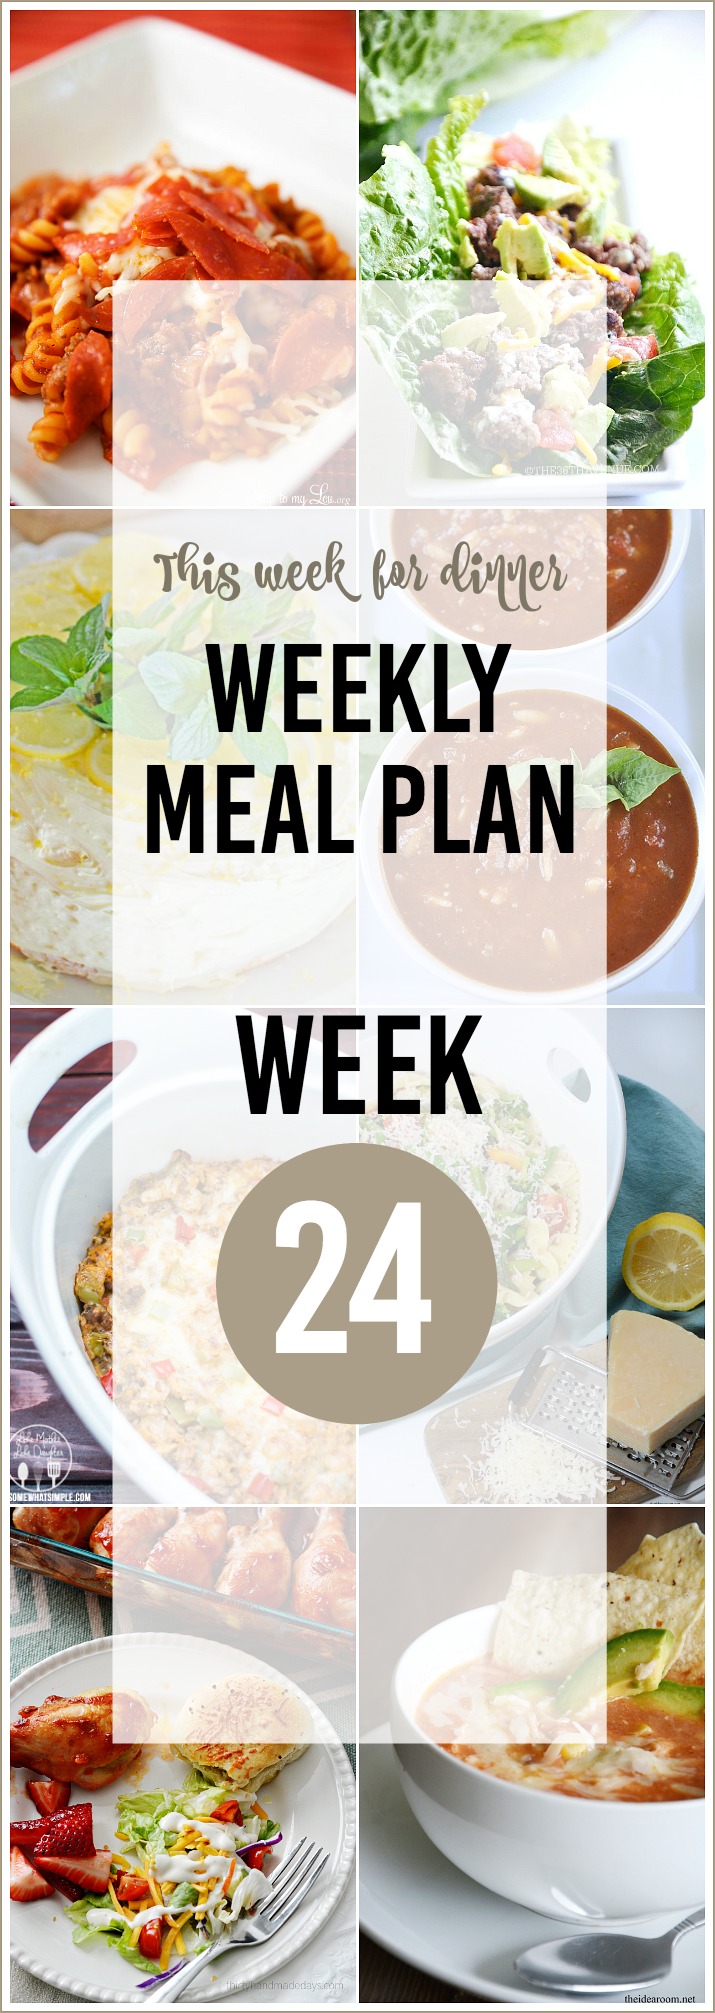 WEEKLY MEAL PLAN 24 the36thavenue.com